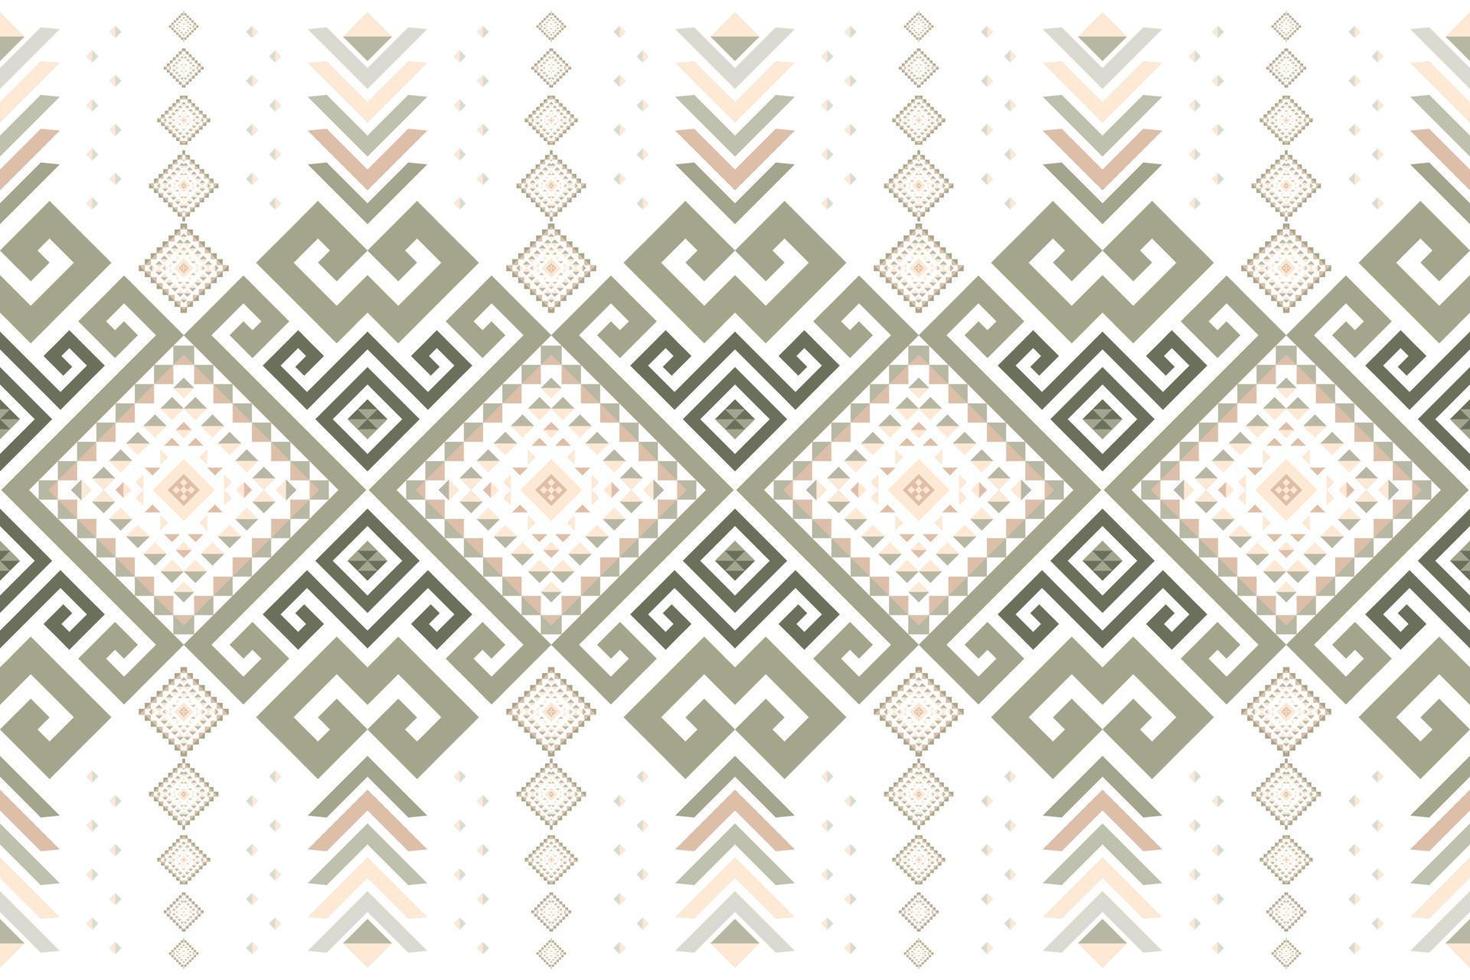 Geometric ethnic style seamless pattern. Design for fabric, wallpaper, background, carpet, clothing. Tribal ethnic vector texture. Vector illustration.